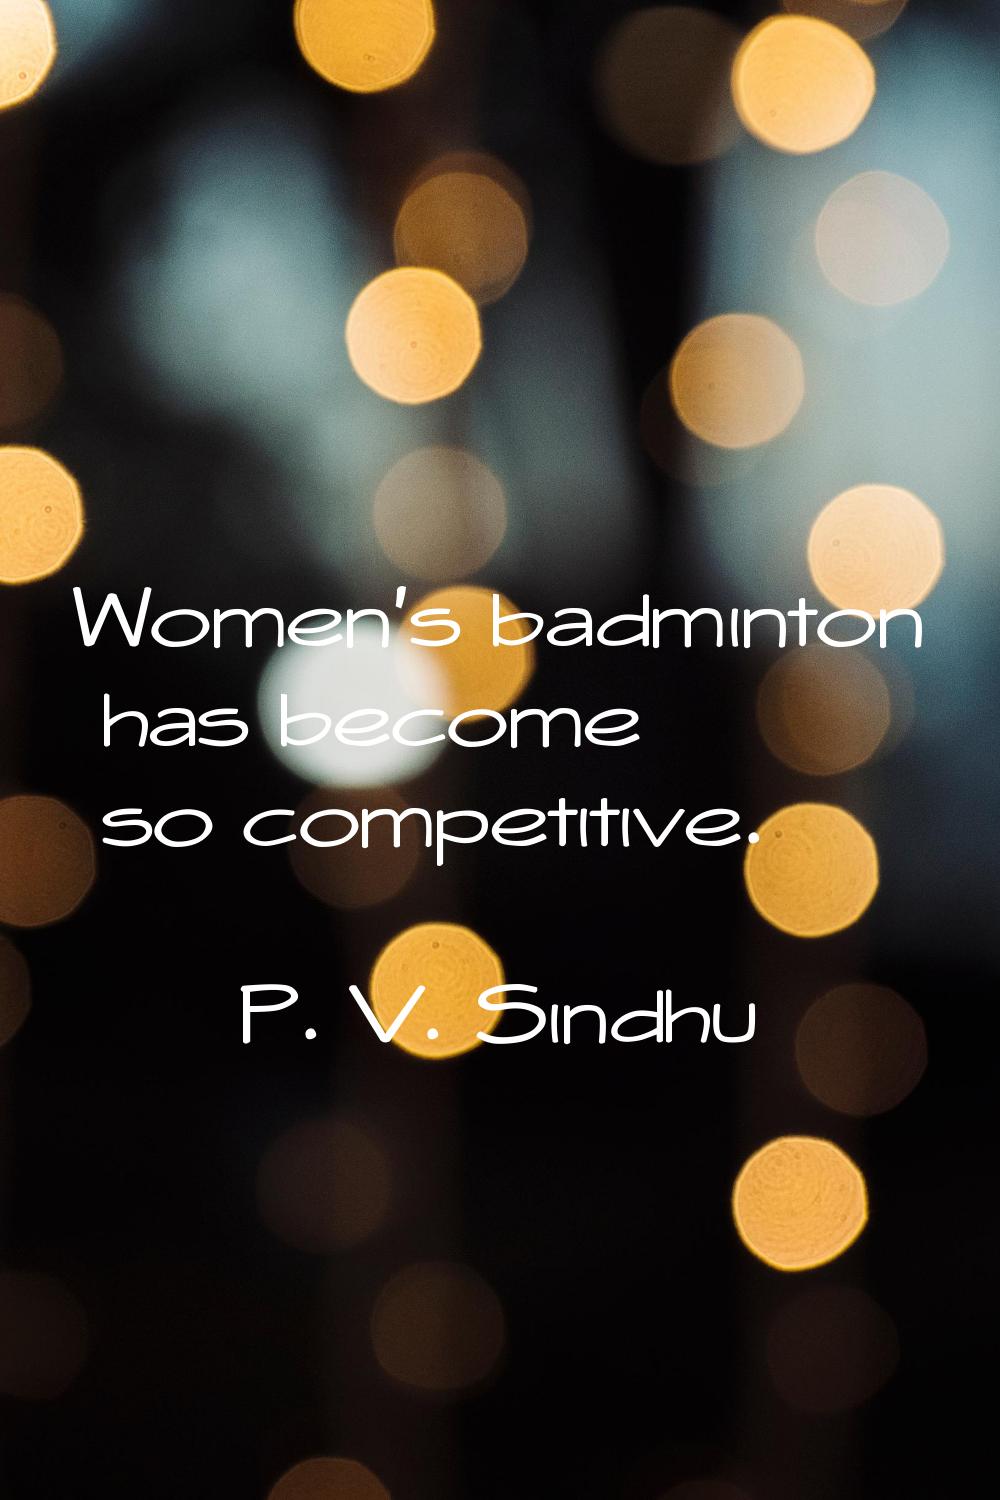 Women's badminton has become so competitive.